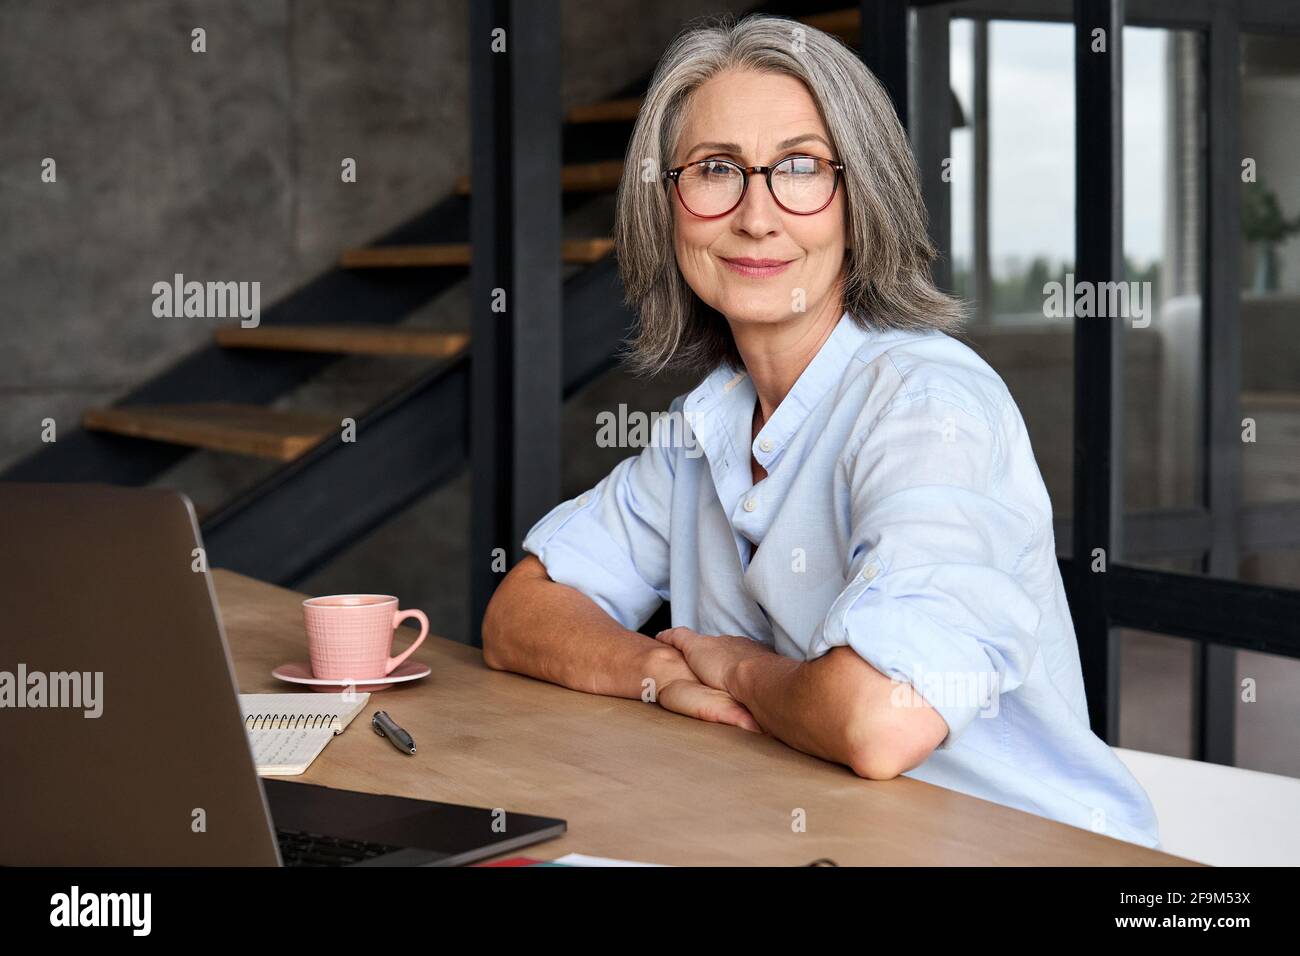 Portrait of smiling business woman 60s aged working at home with laptop. Stock Photo